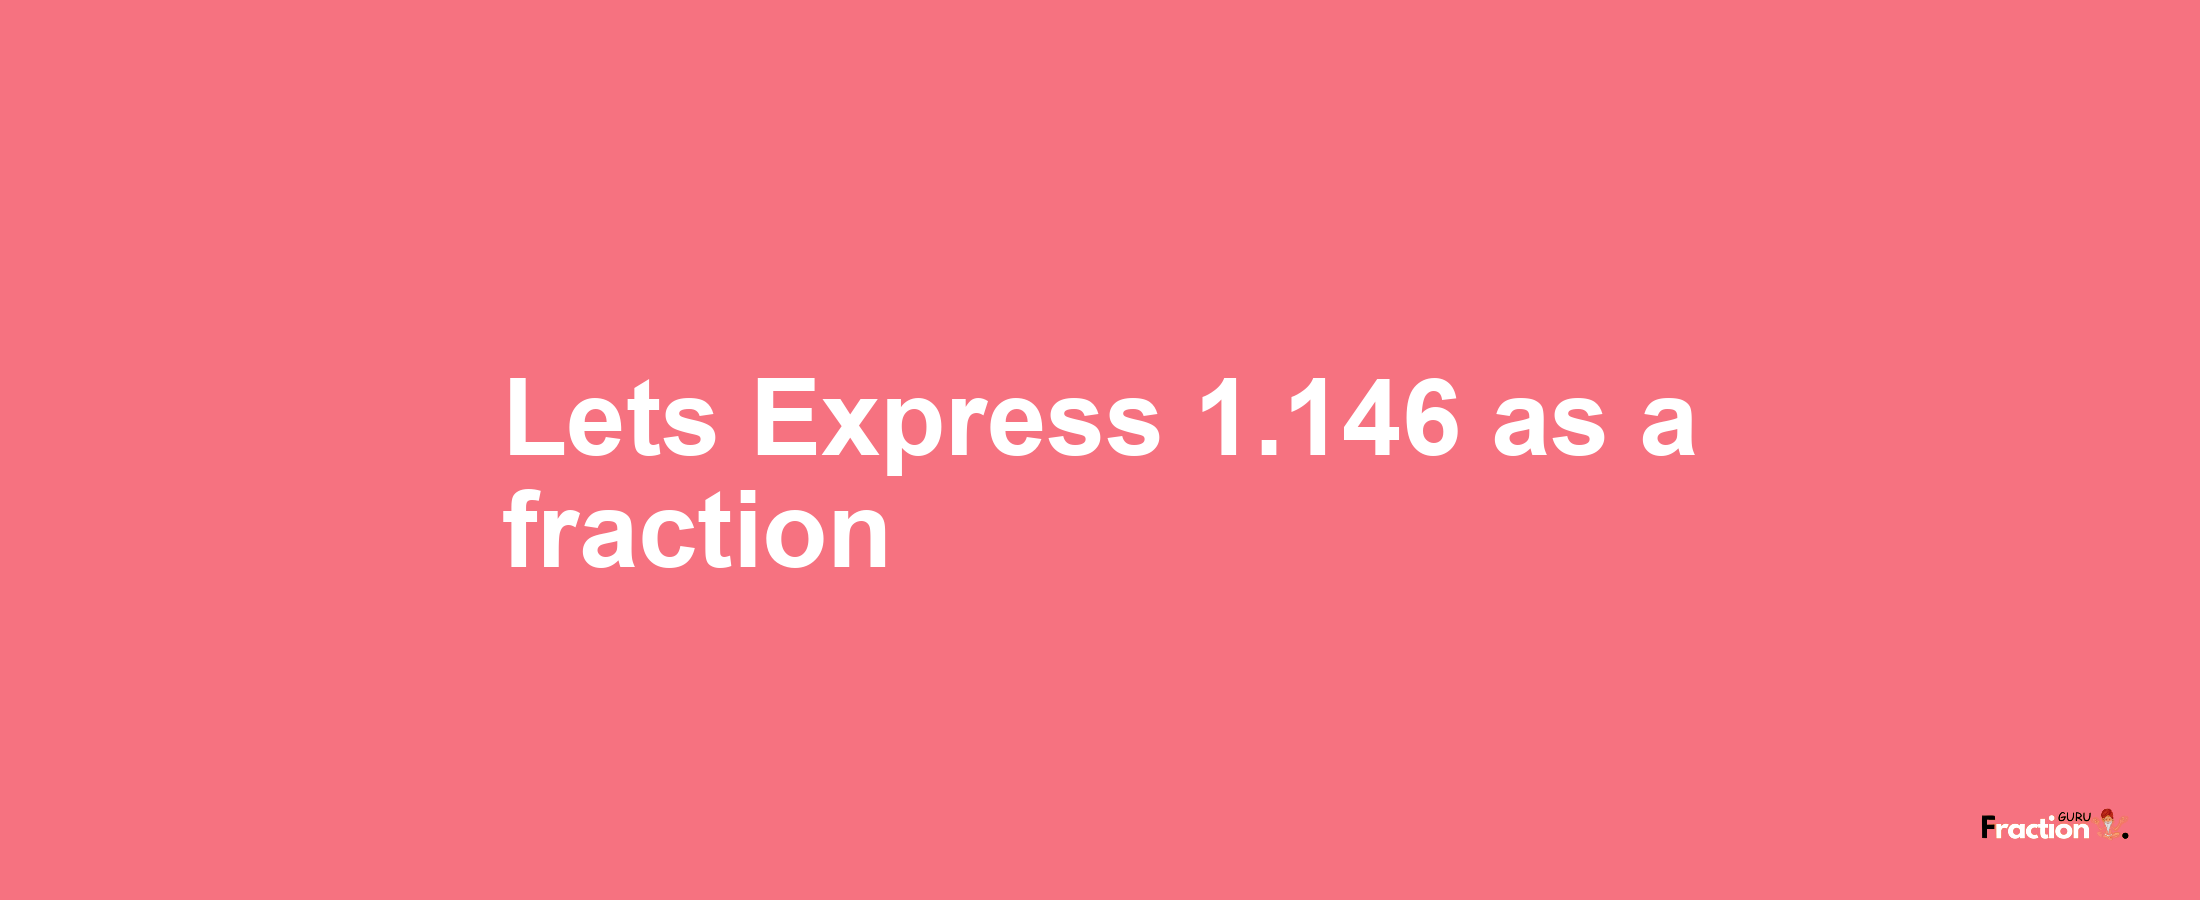 Lets Express 1.146 as afraction